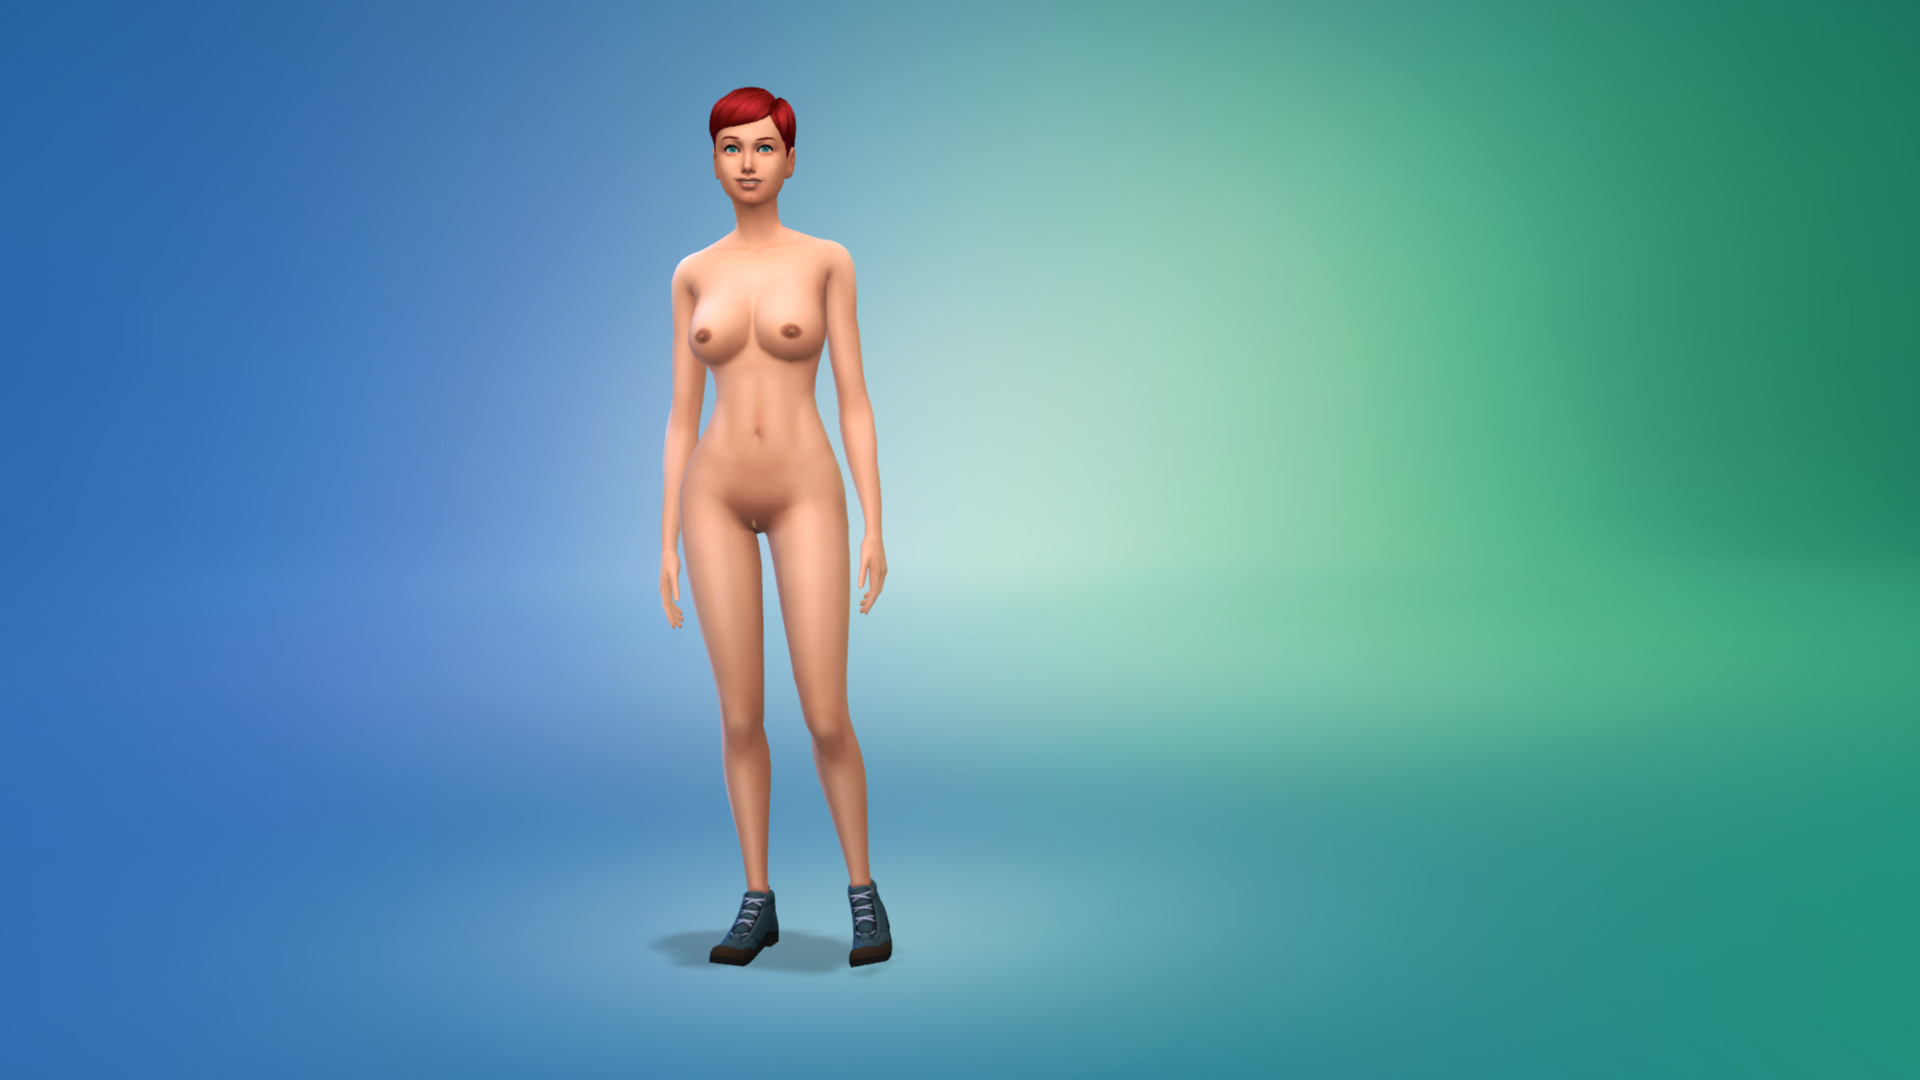 The sims 4 nude in Tainan